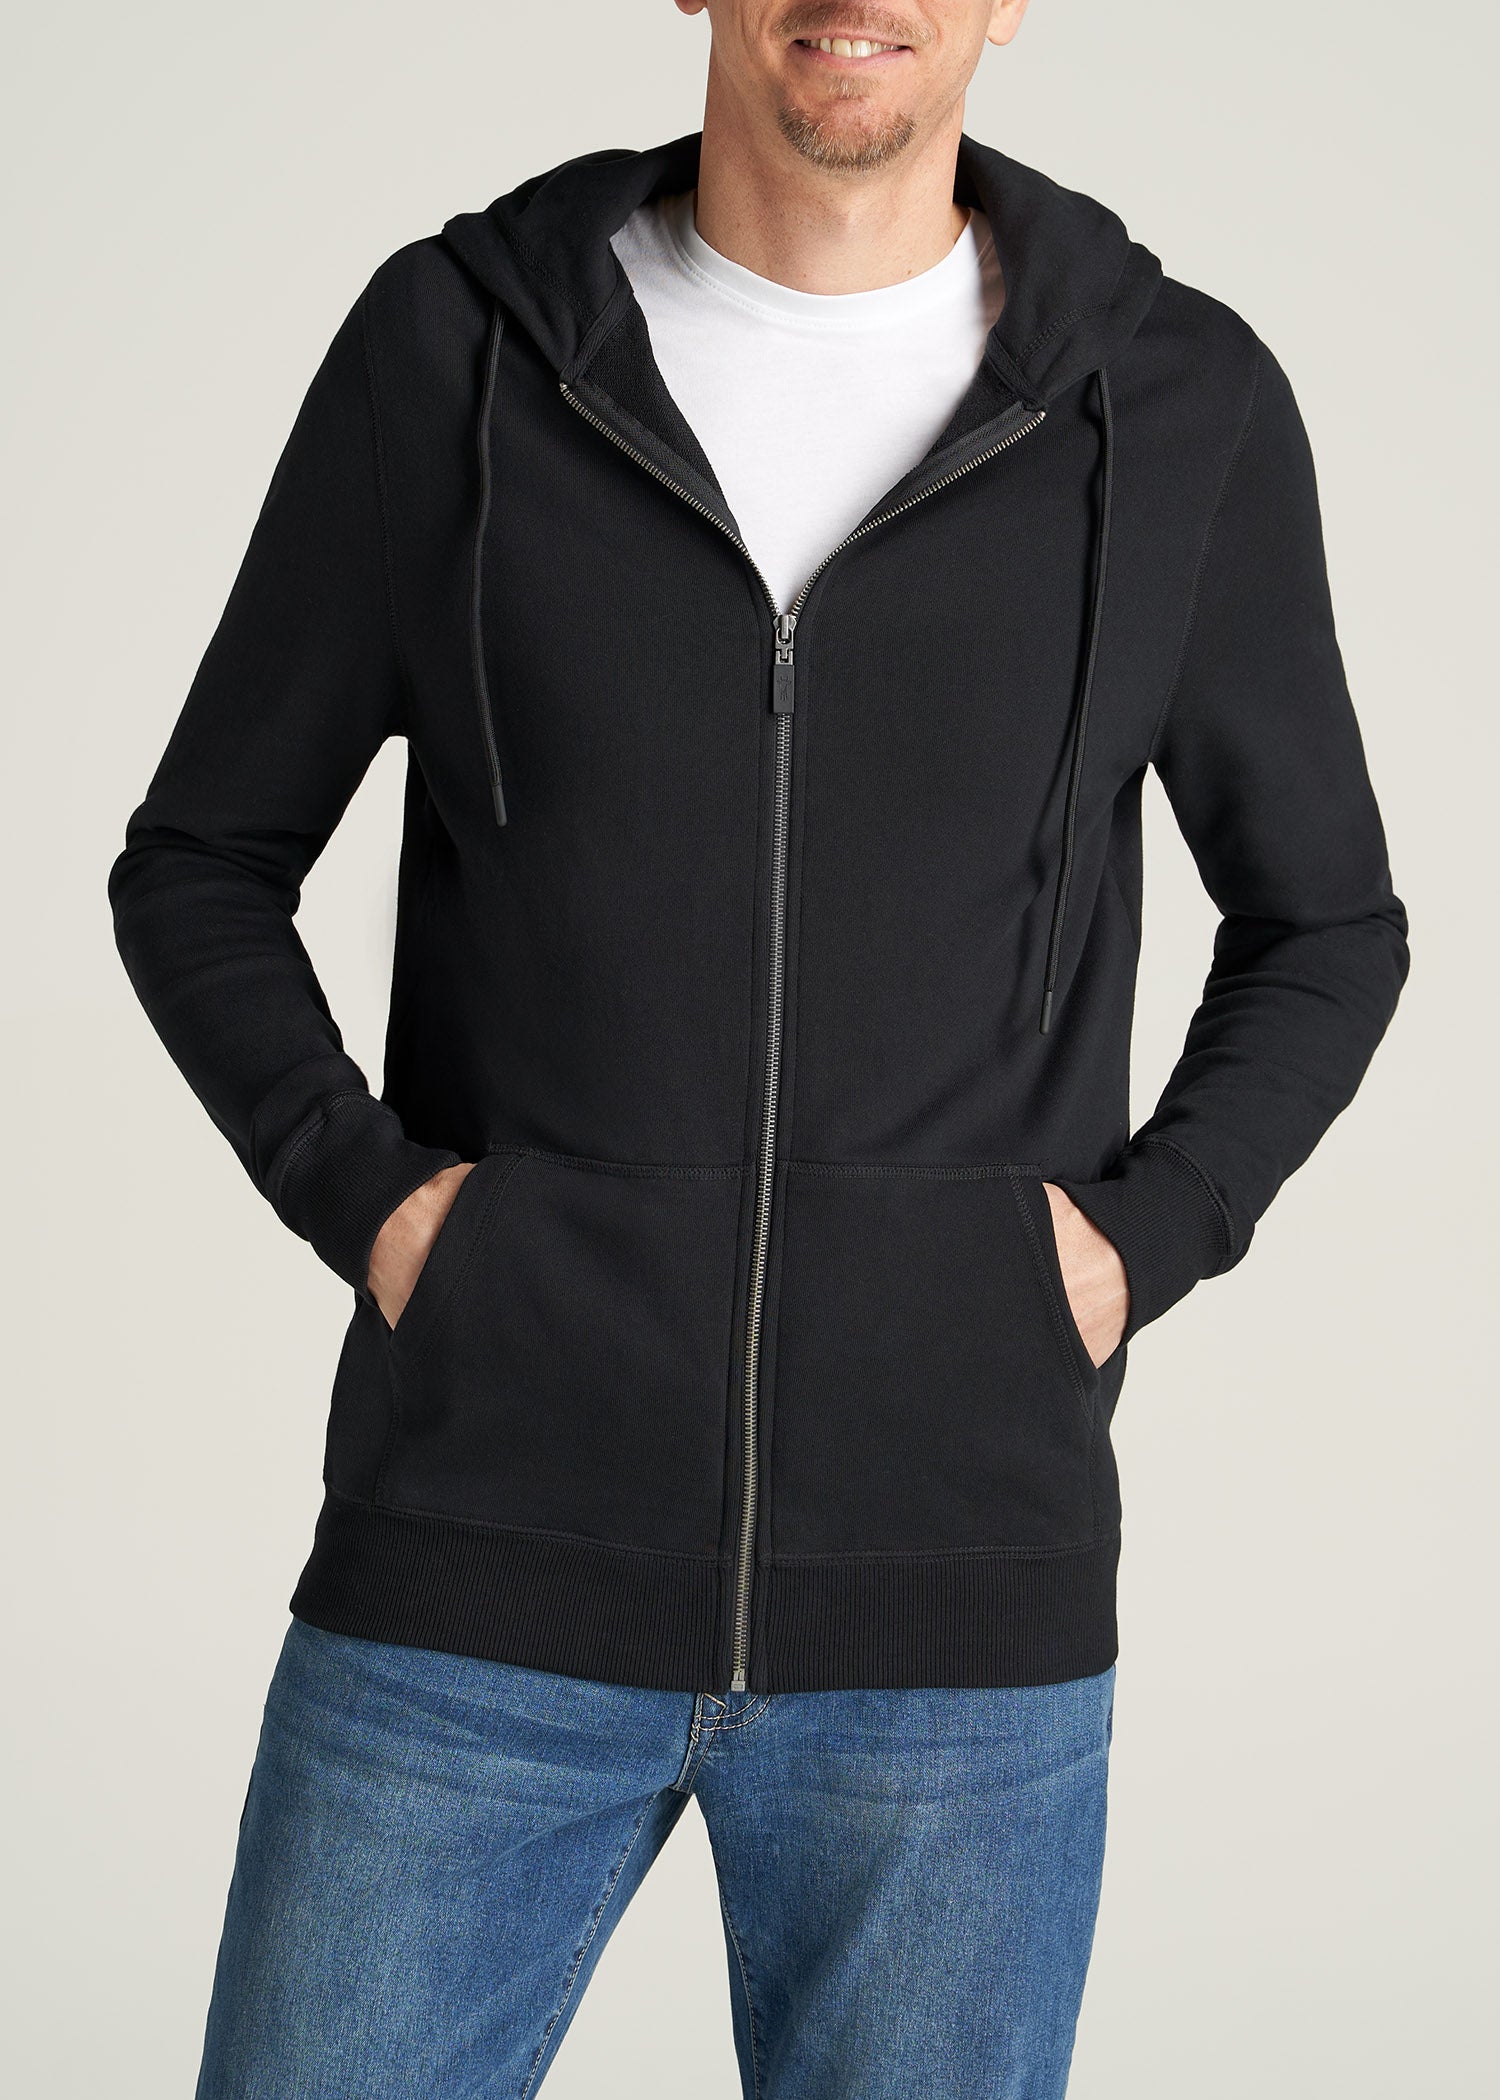 Wearever French Terry Full-Zip Men's Tall Hoodie in Black 2XL / Tall / Black